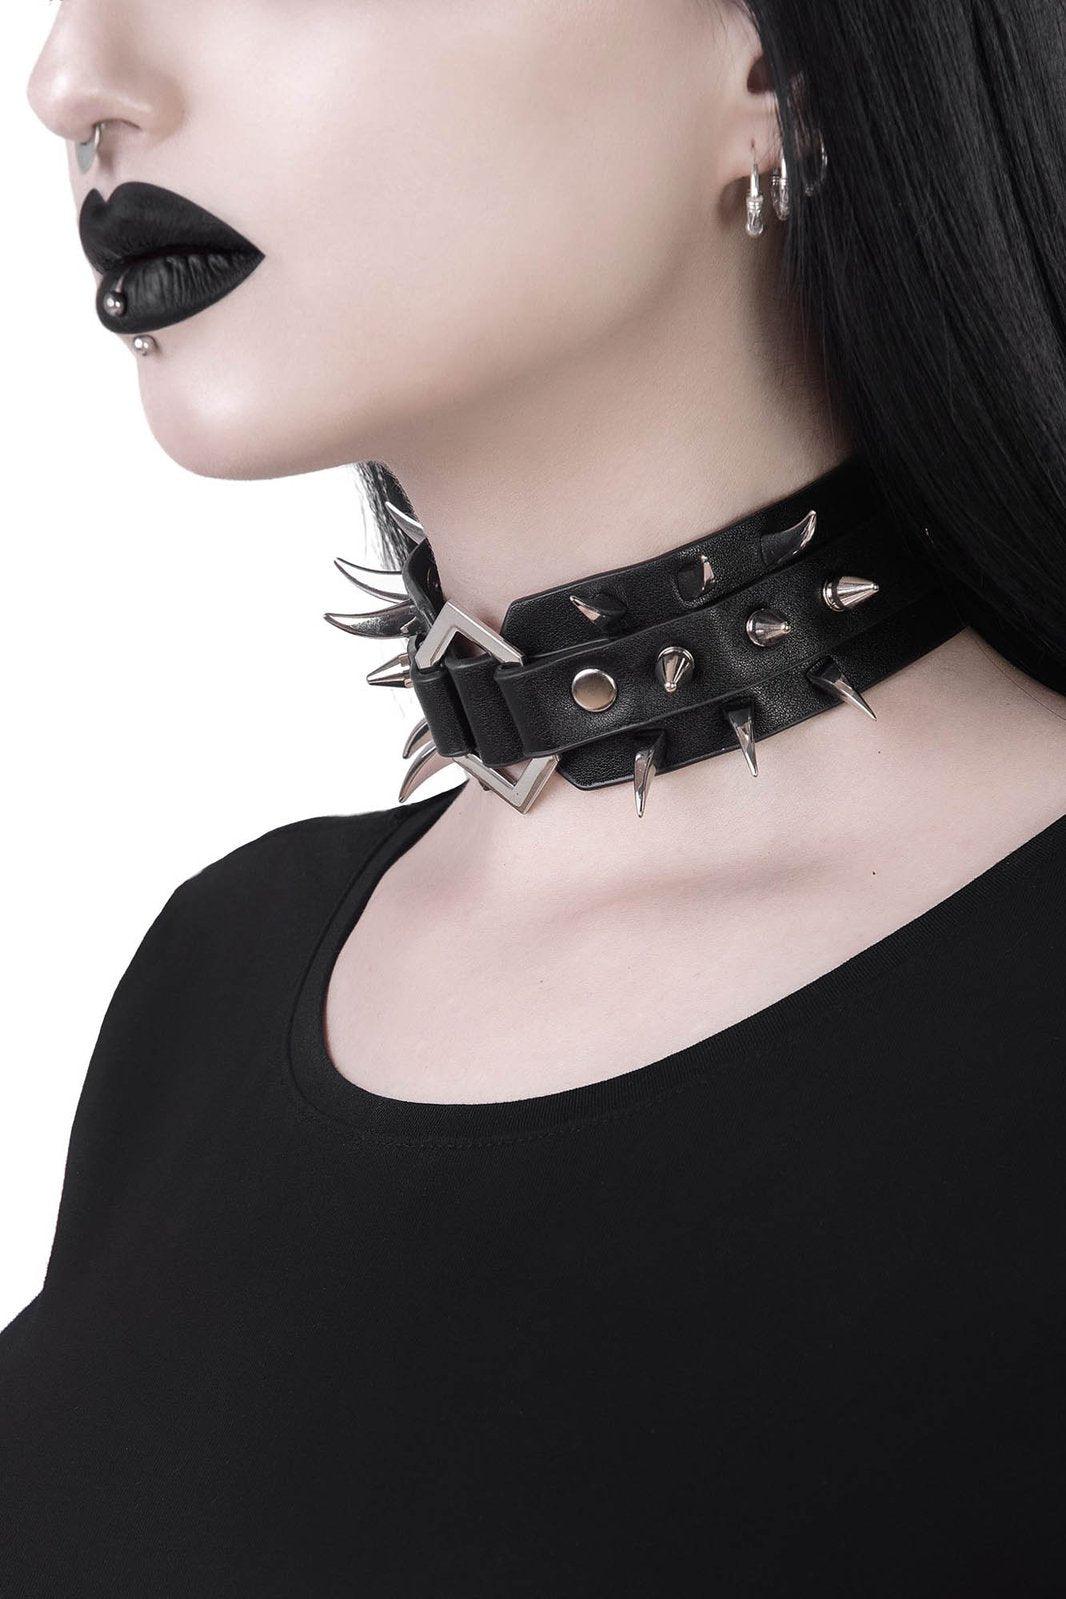 FOR SALE : Spiked Goth Chokers (closed) by Tay-Niko-Y on DeviantArt